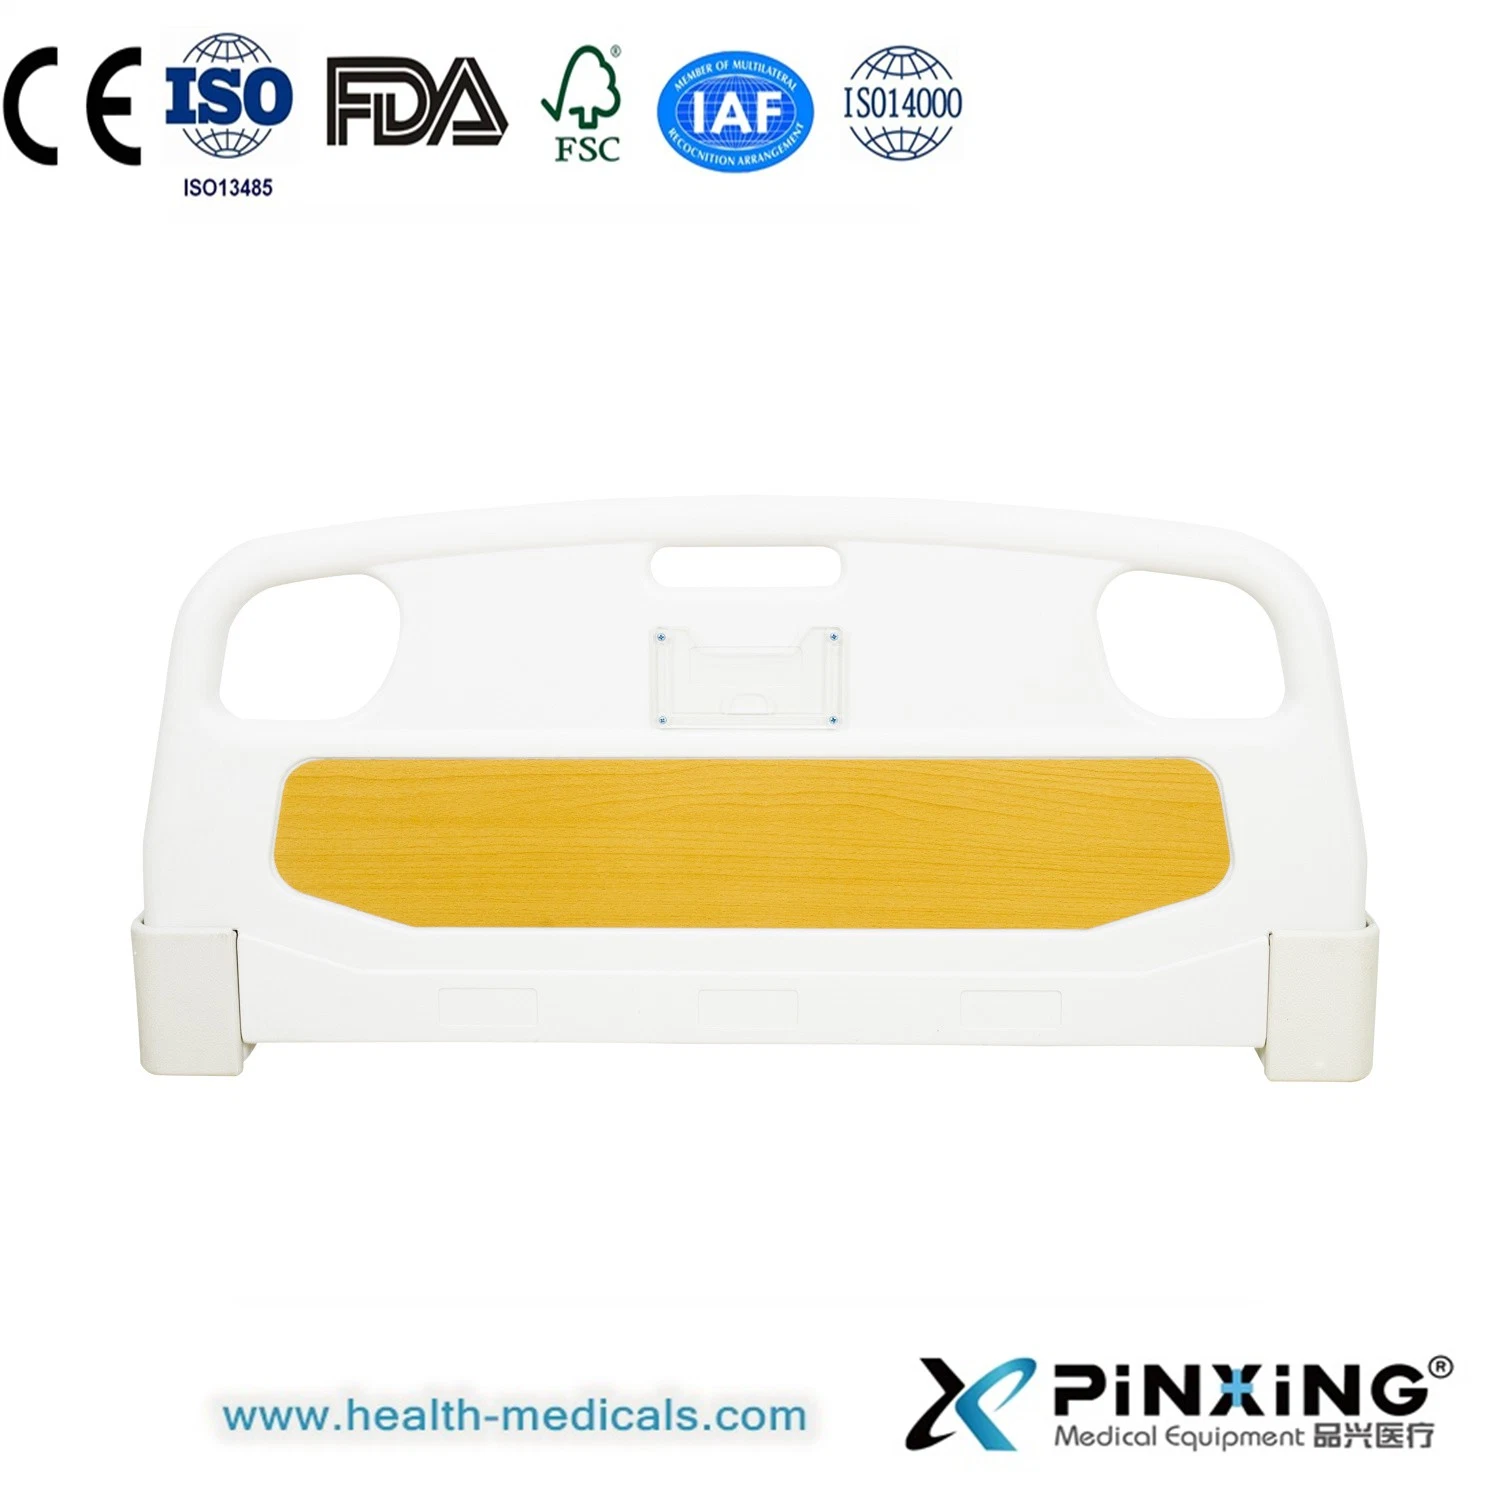 Low Price Durable Head and Foot Board for Emergency